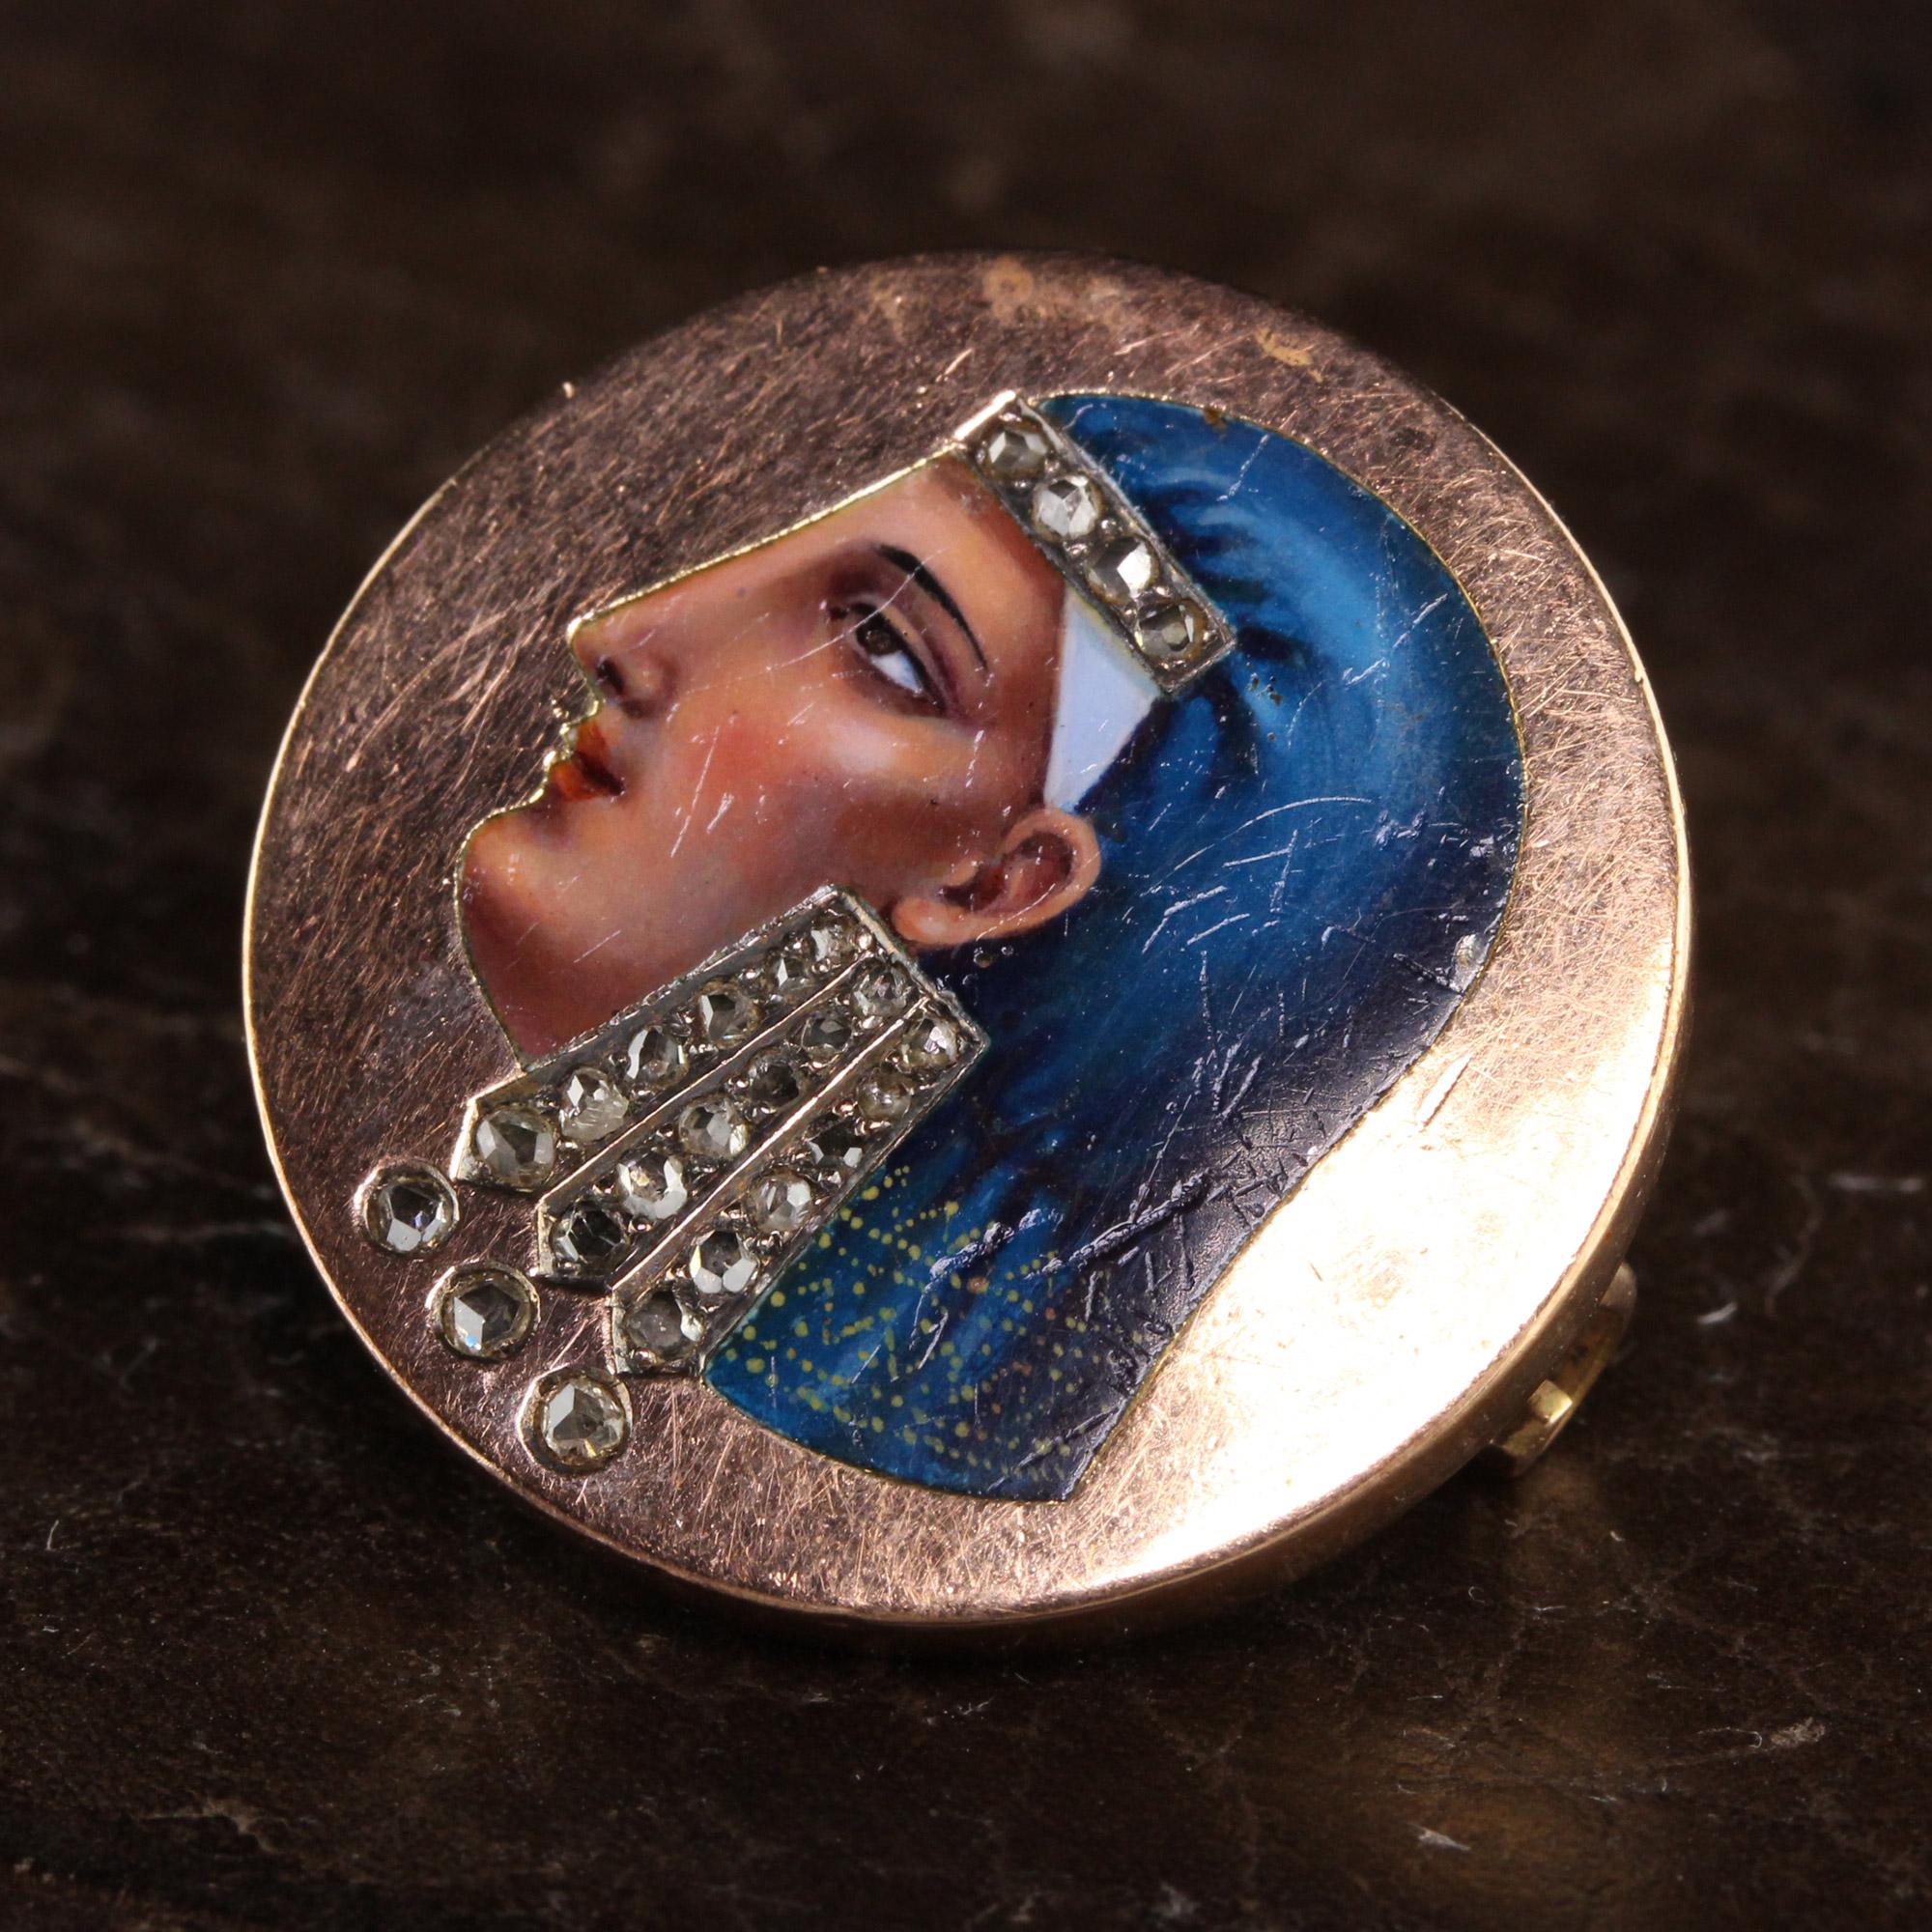 Gorgeous Antique Victorian 14K Rose Gold Egyptian Revival Enameled Diamond Pin. This amazing pin features an enameled portrait of Egyptian royalty wearing a diamond headband and head covering. The enamel is in amazing condition minus a few scuffs